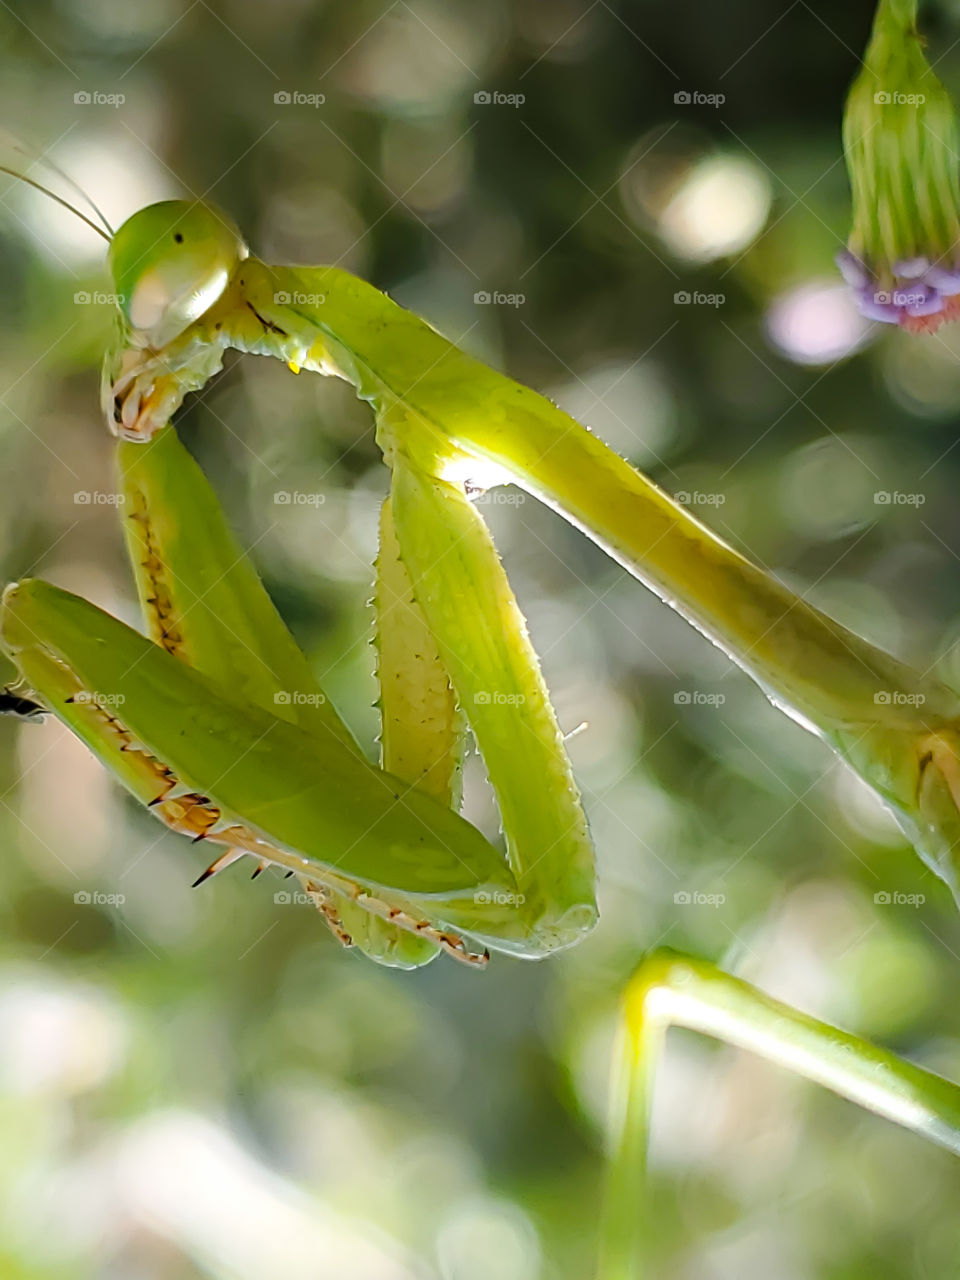 Mantis are often viewed from above,  upside down or a close up of their face.  This view is from the side while looking up at the mantis being beautiful illuminated by morning sunlight, thus creating a unique view.